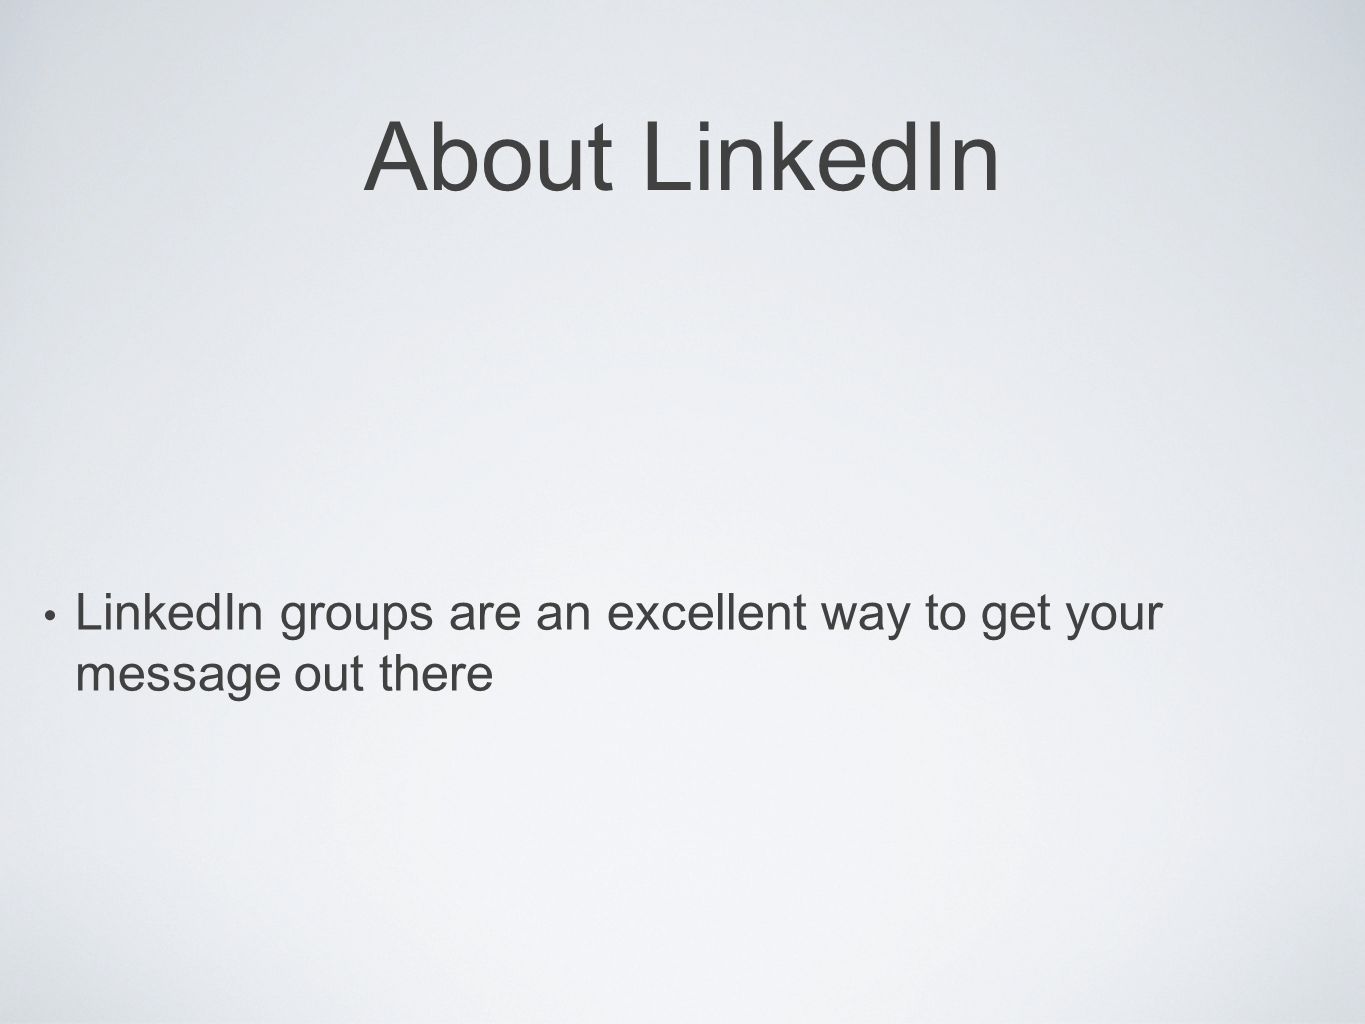 About LinkedIn LinkedIn groups are an excellent way to get your message out there